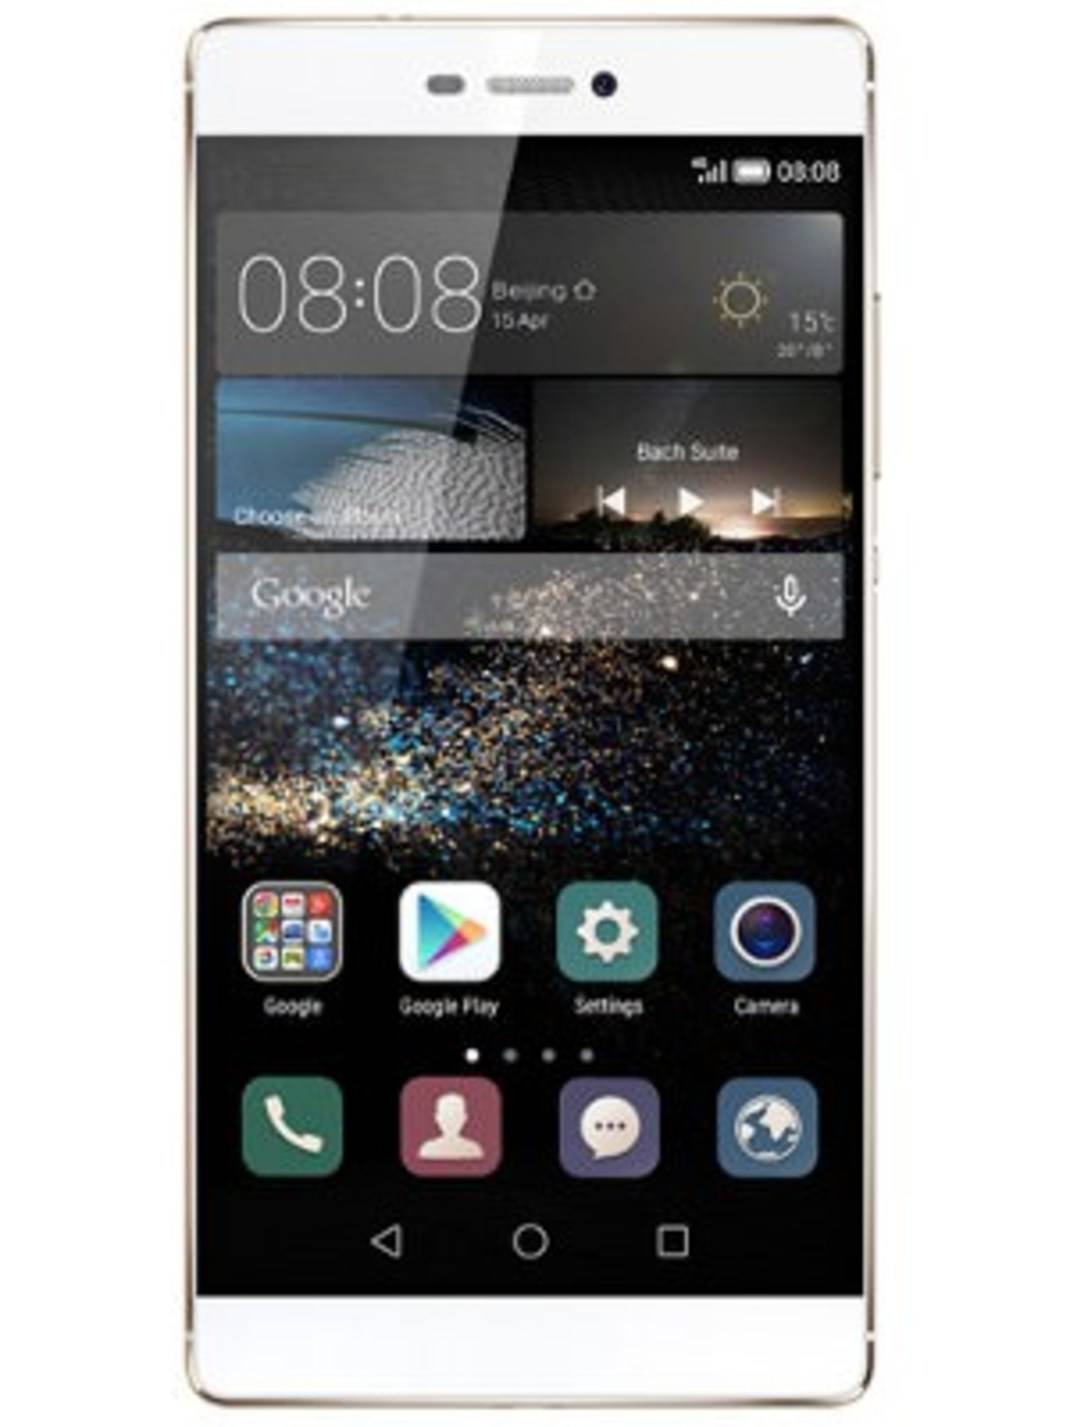 Inferieur Hoofd stil Huawei Ascend P8 vs Huawei P8 Lite: Compare Specifications, Price | Gadgets  Now